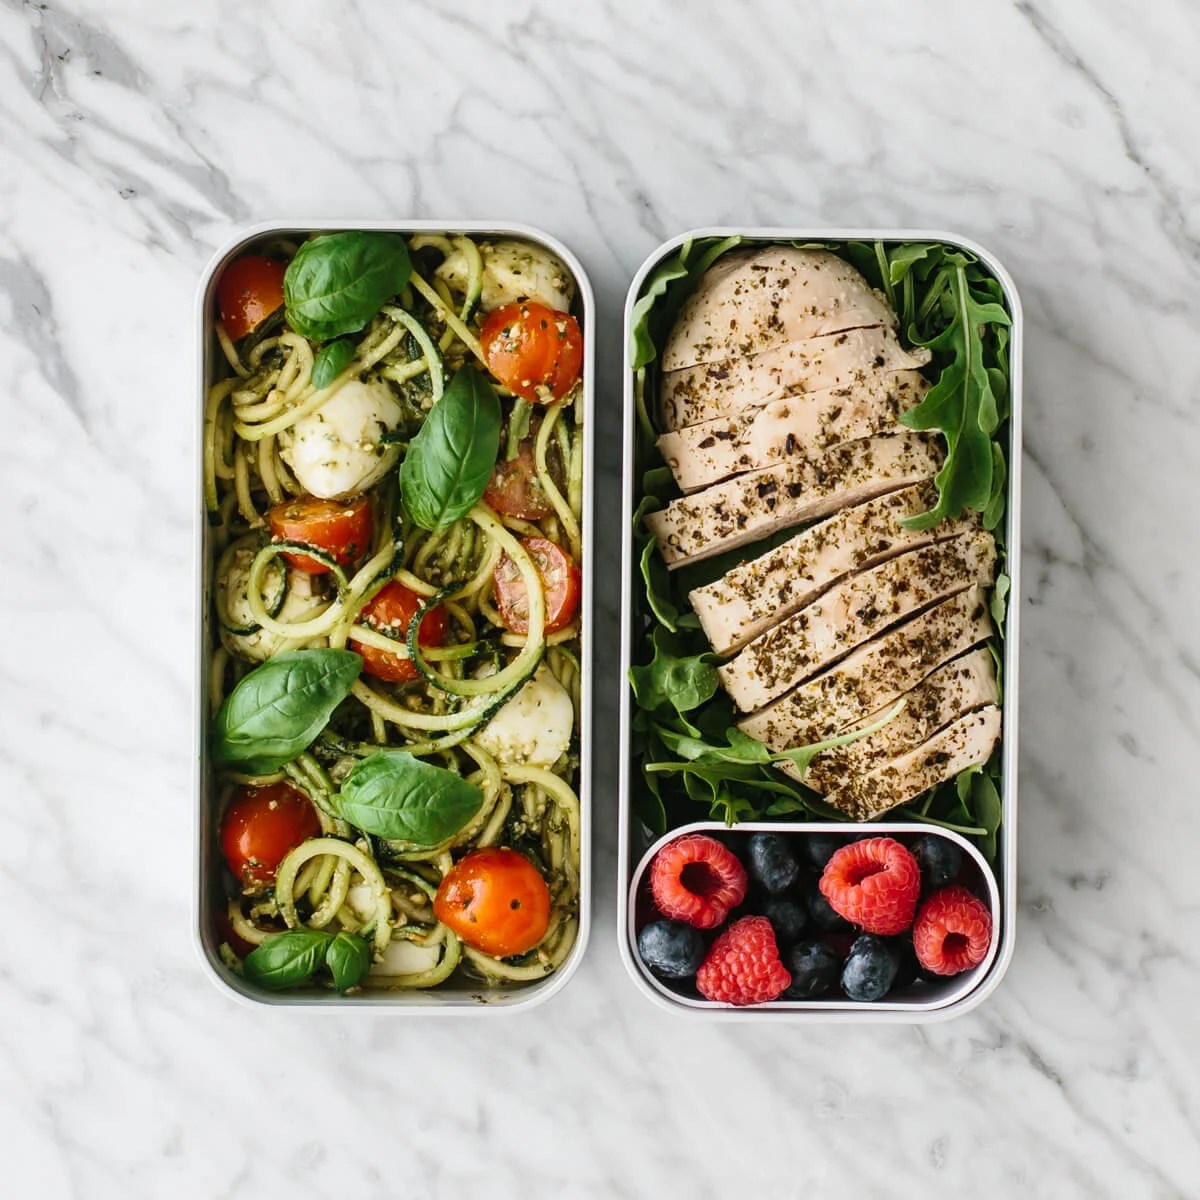 Bento box filled with zucchini noodles, chicken and berries.